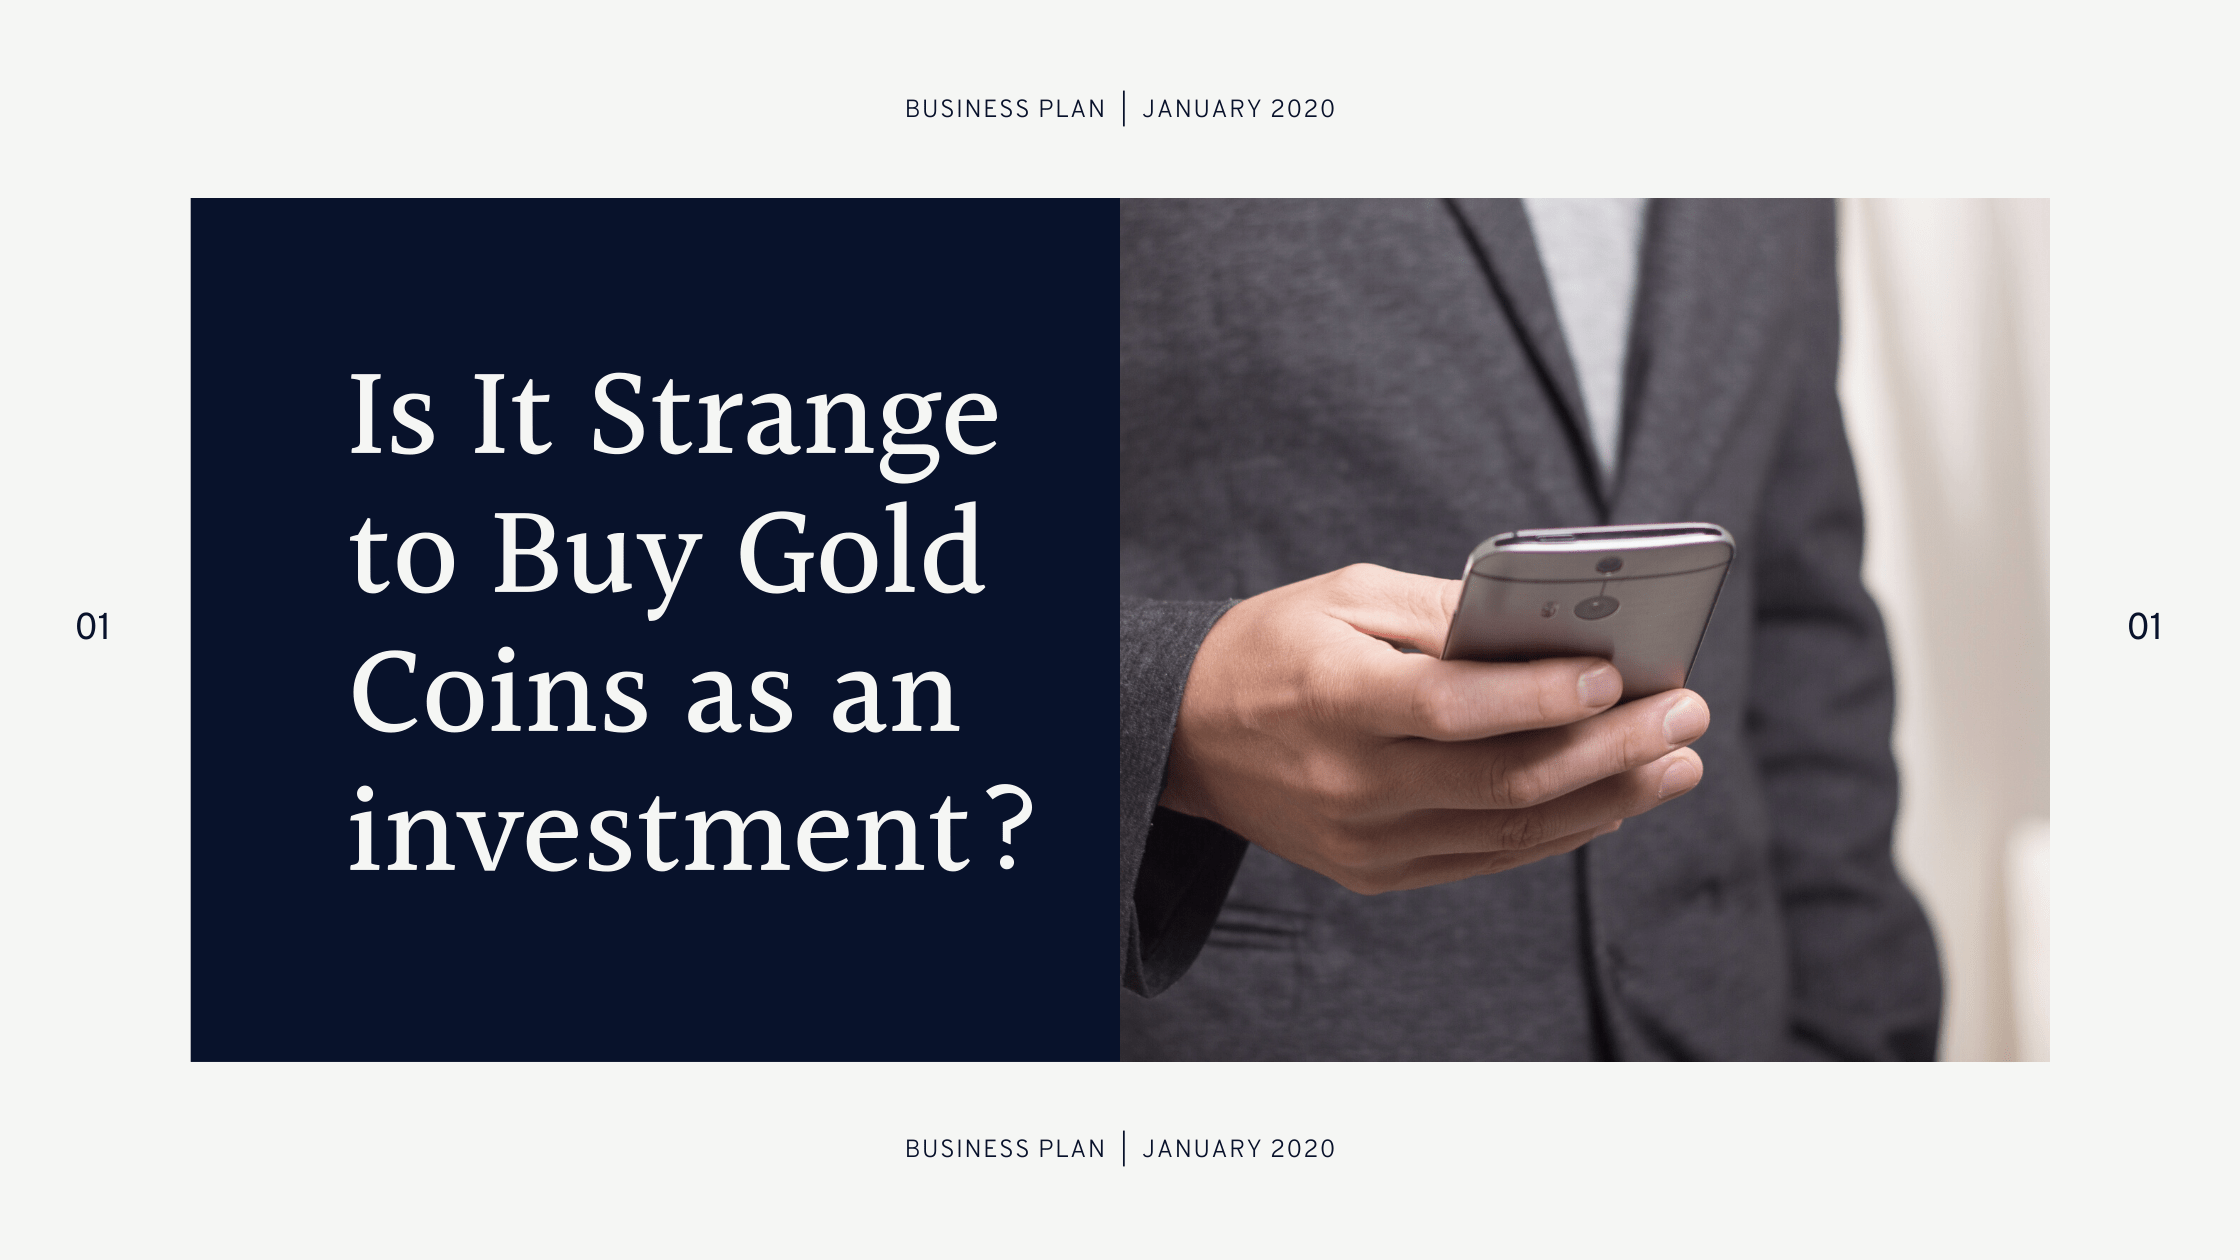 Buy Gold Coins as an investment